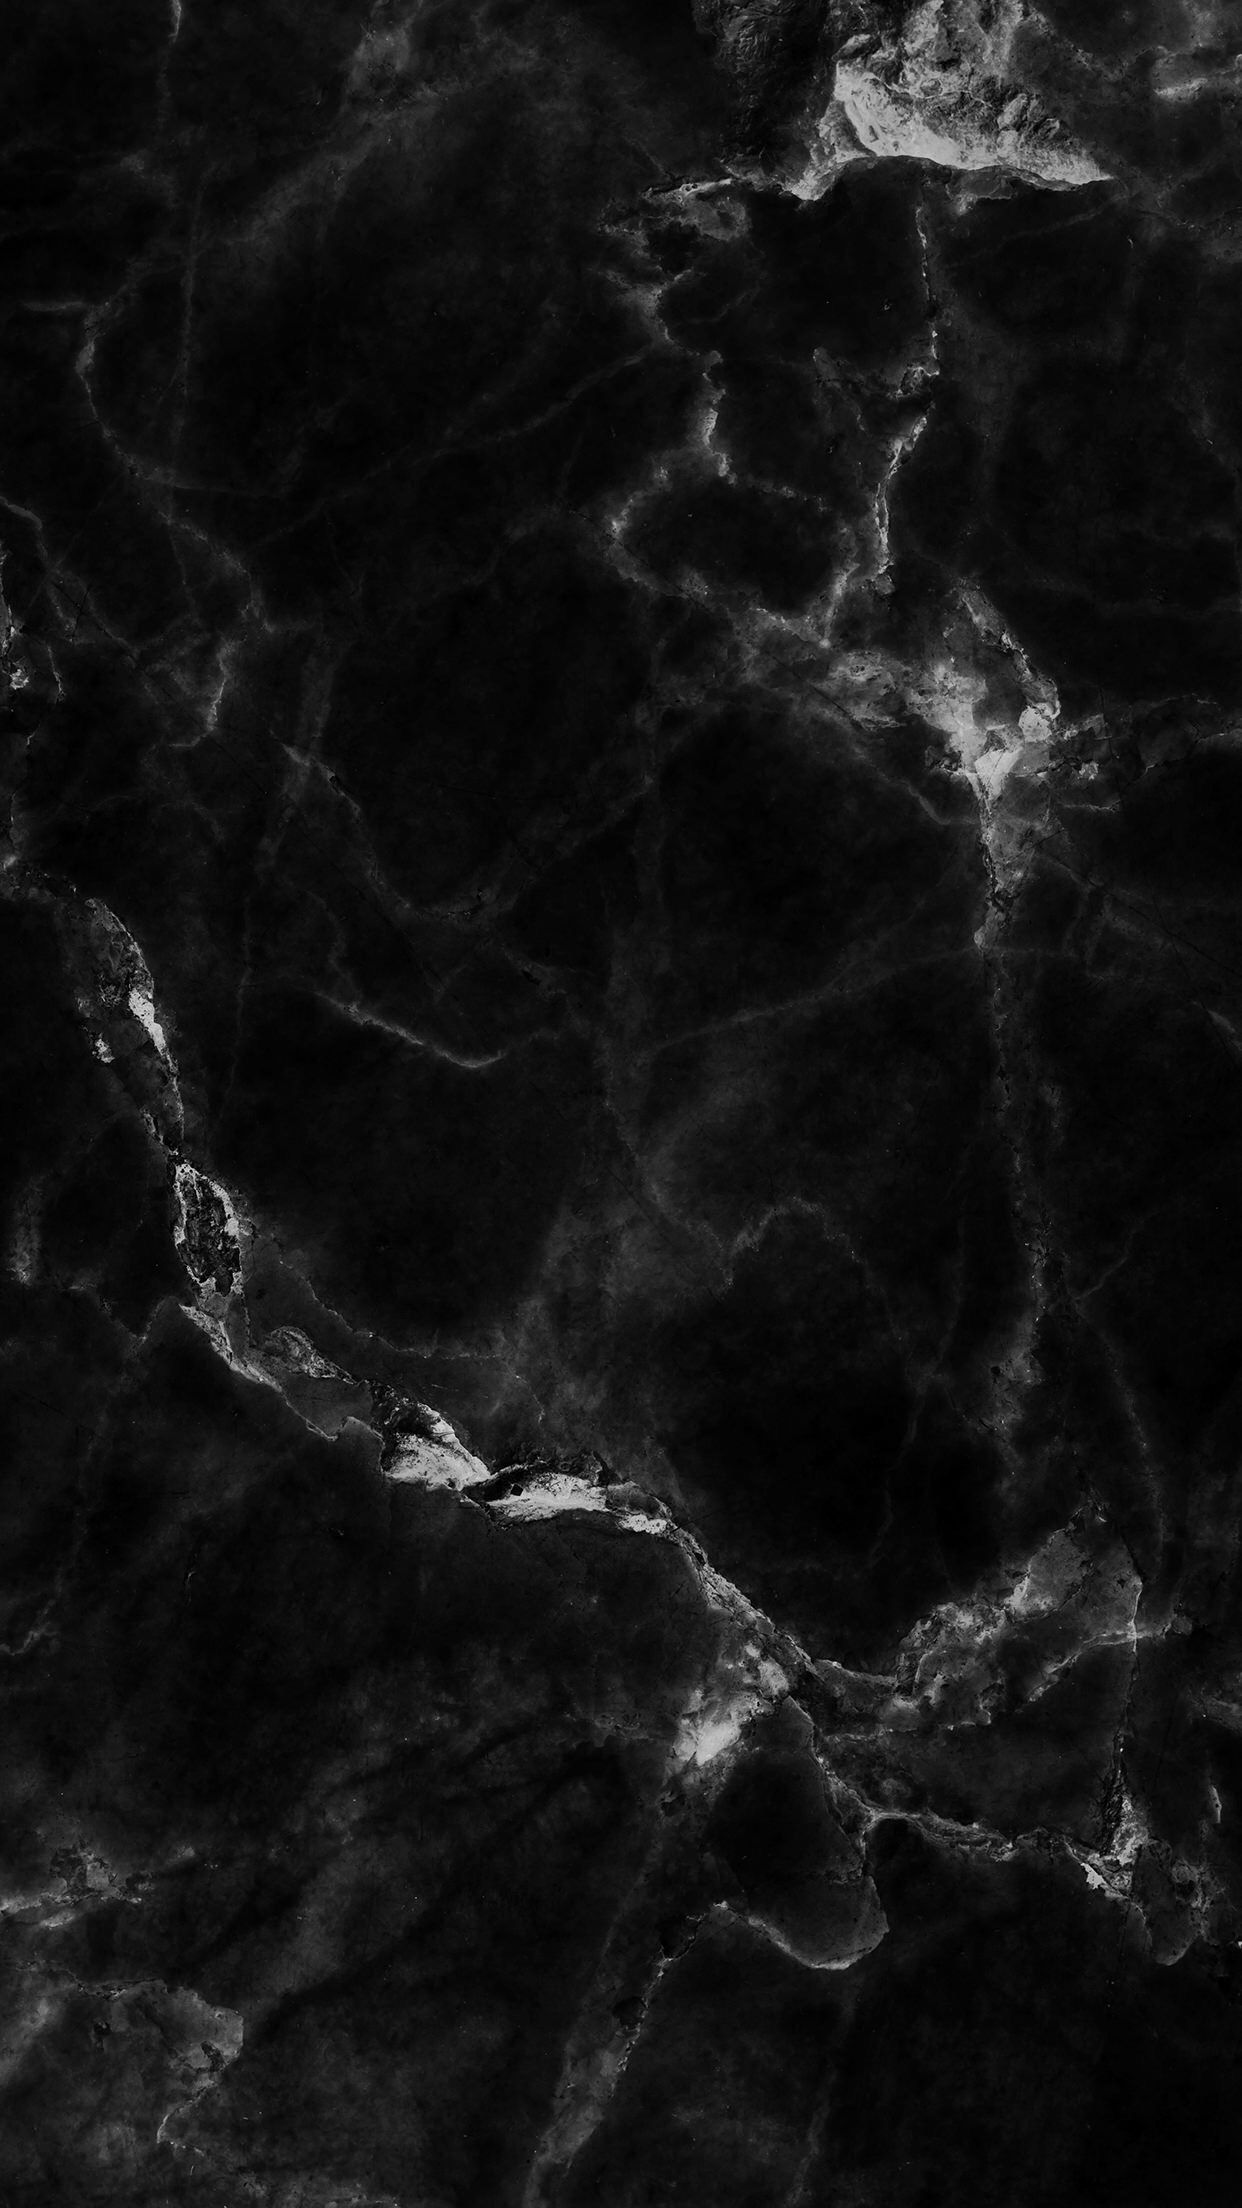 Black, White, Water, Sky, Atmosphere, Black And White. Marble